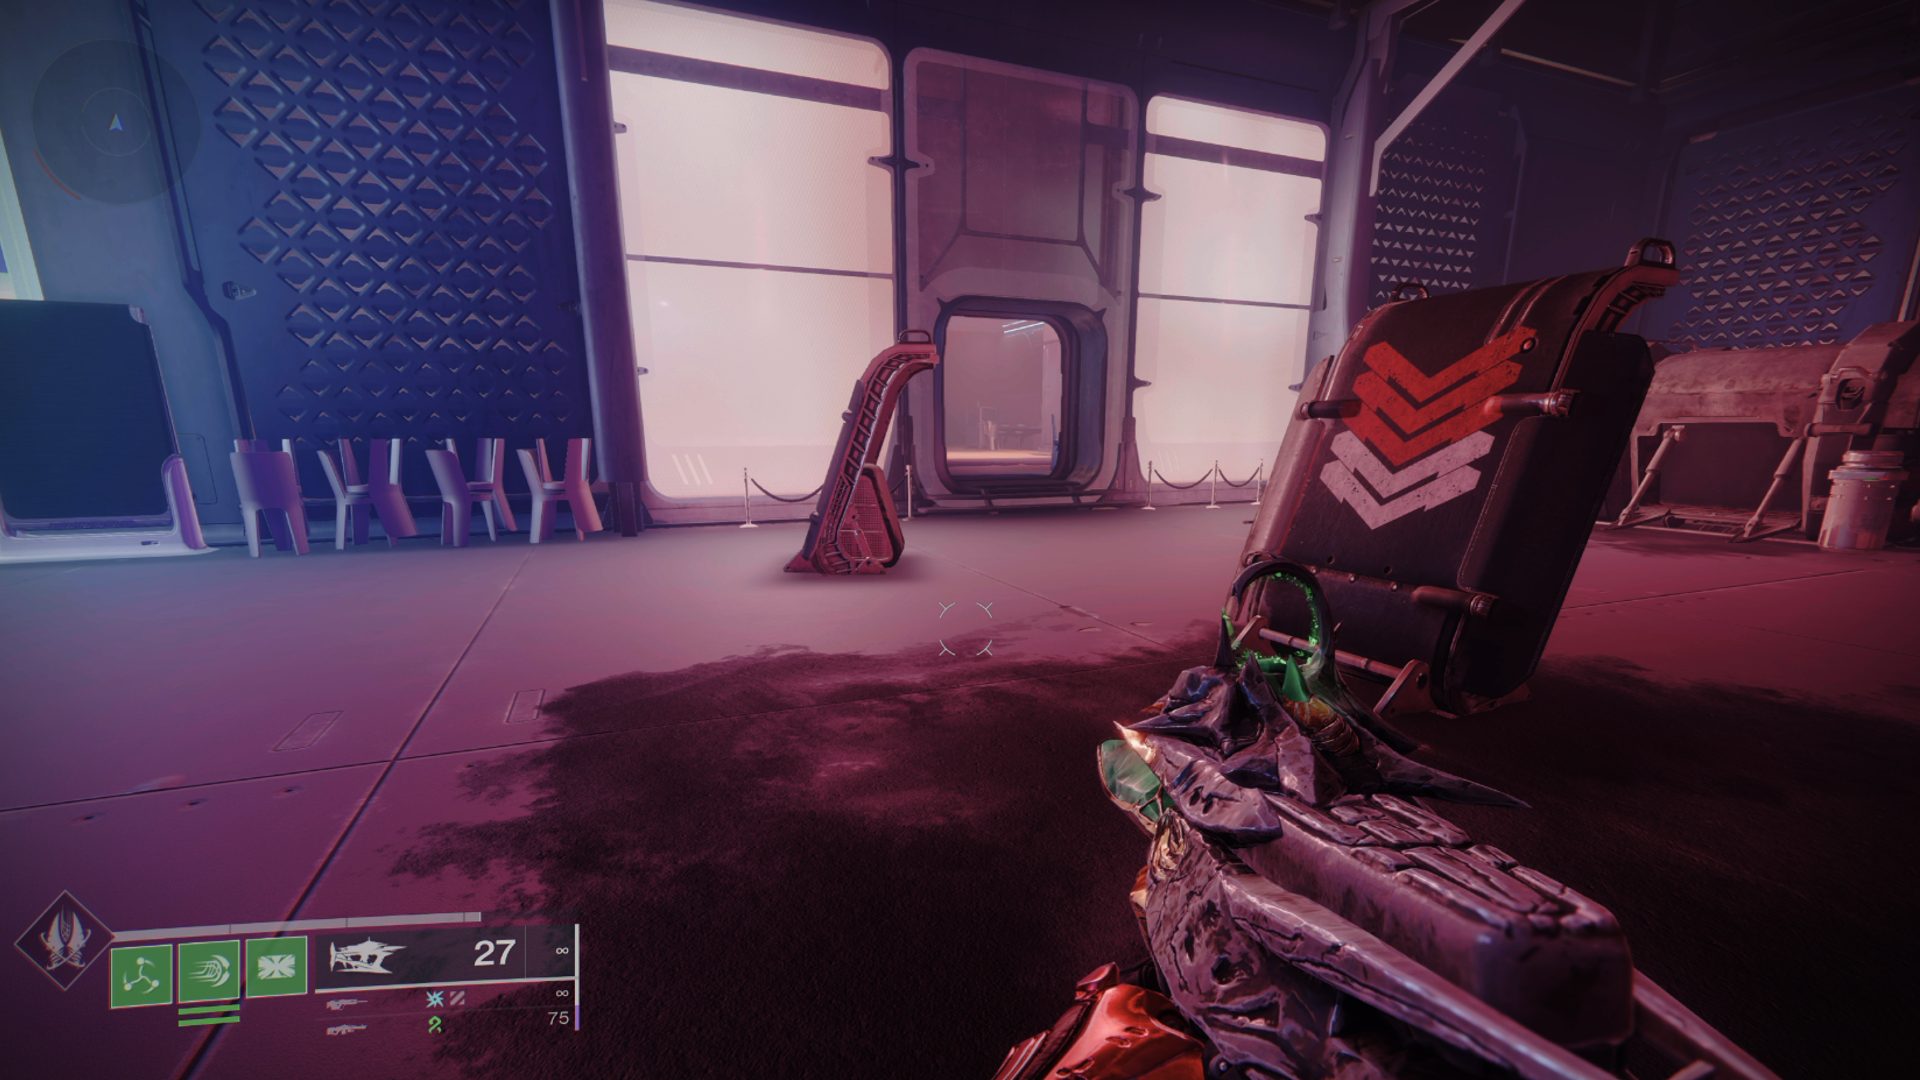 Destiny 2 Action Figures Locations: The door entrance can be seen